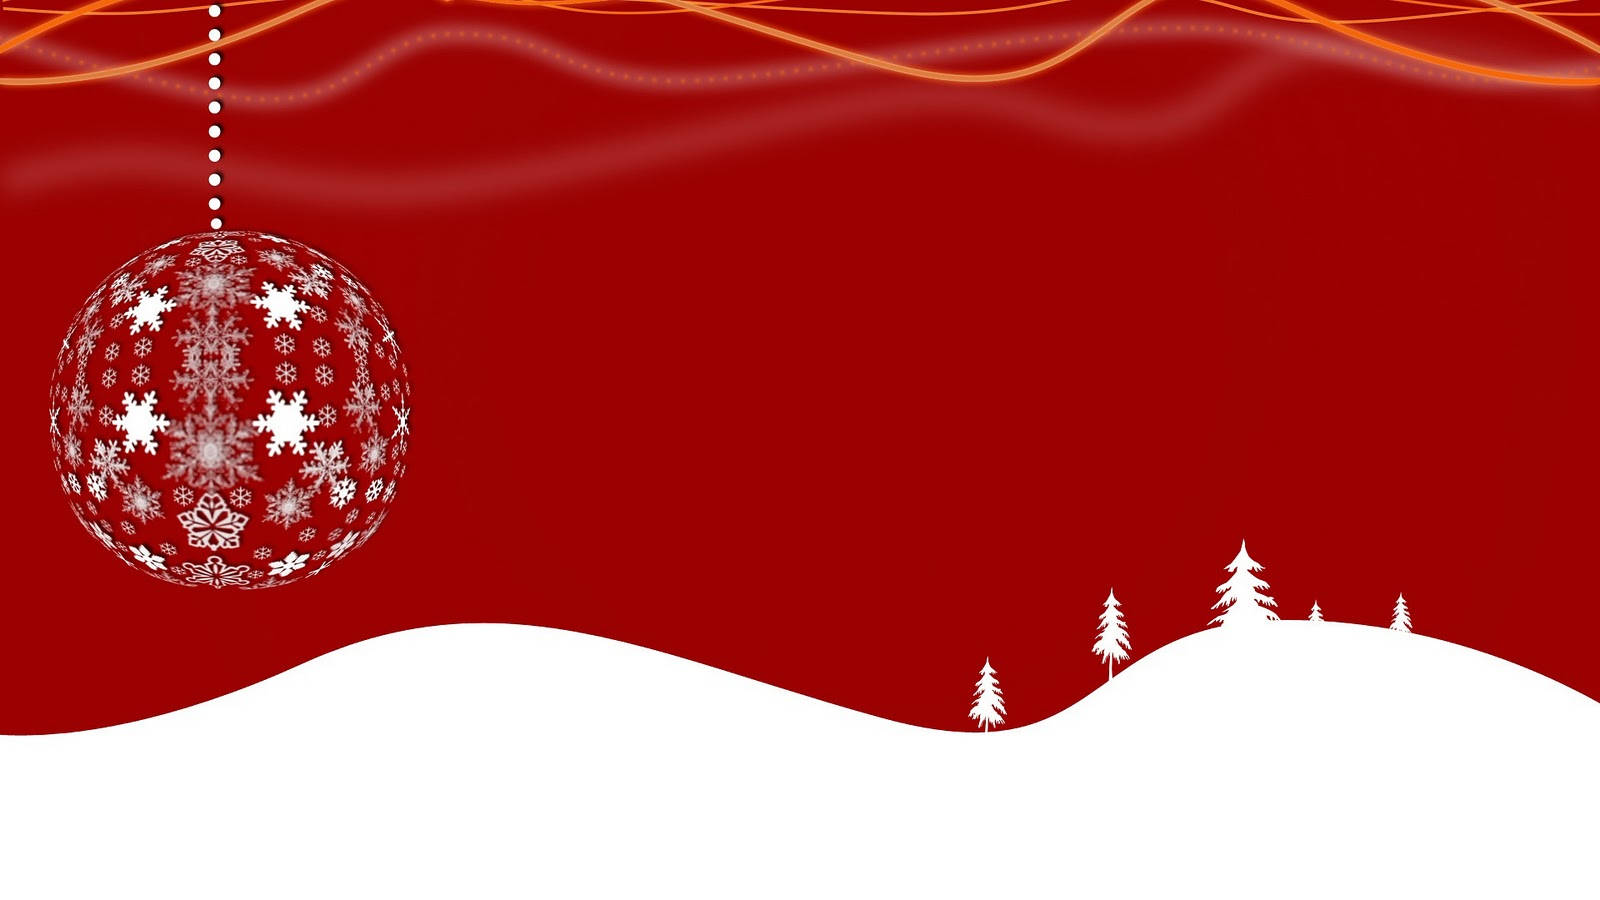 Snowfield On Red Christmas Background